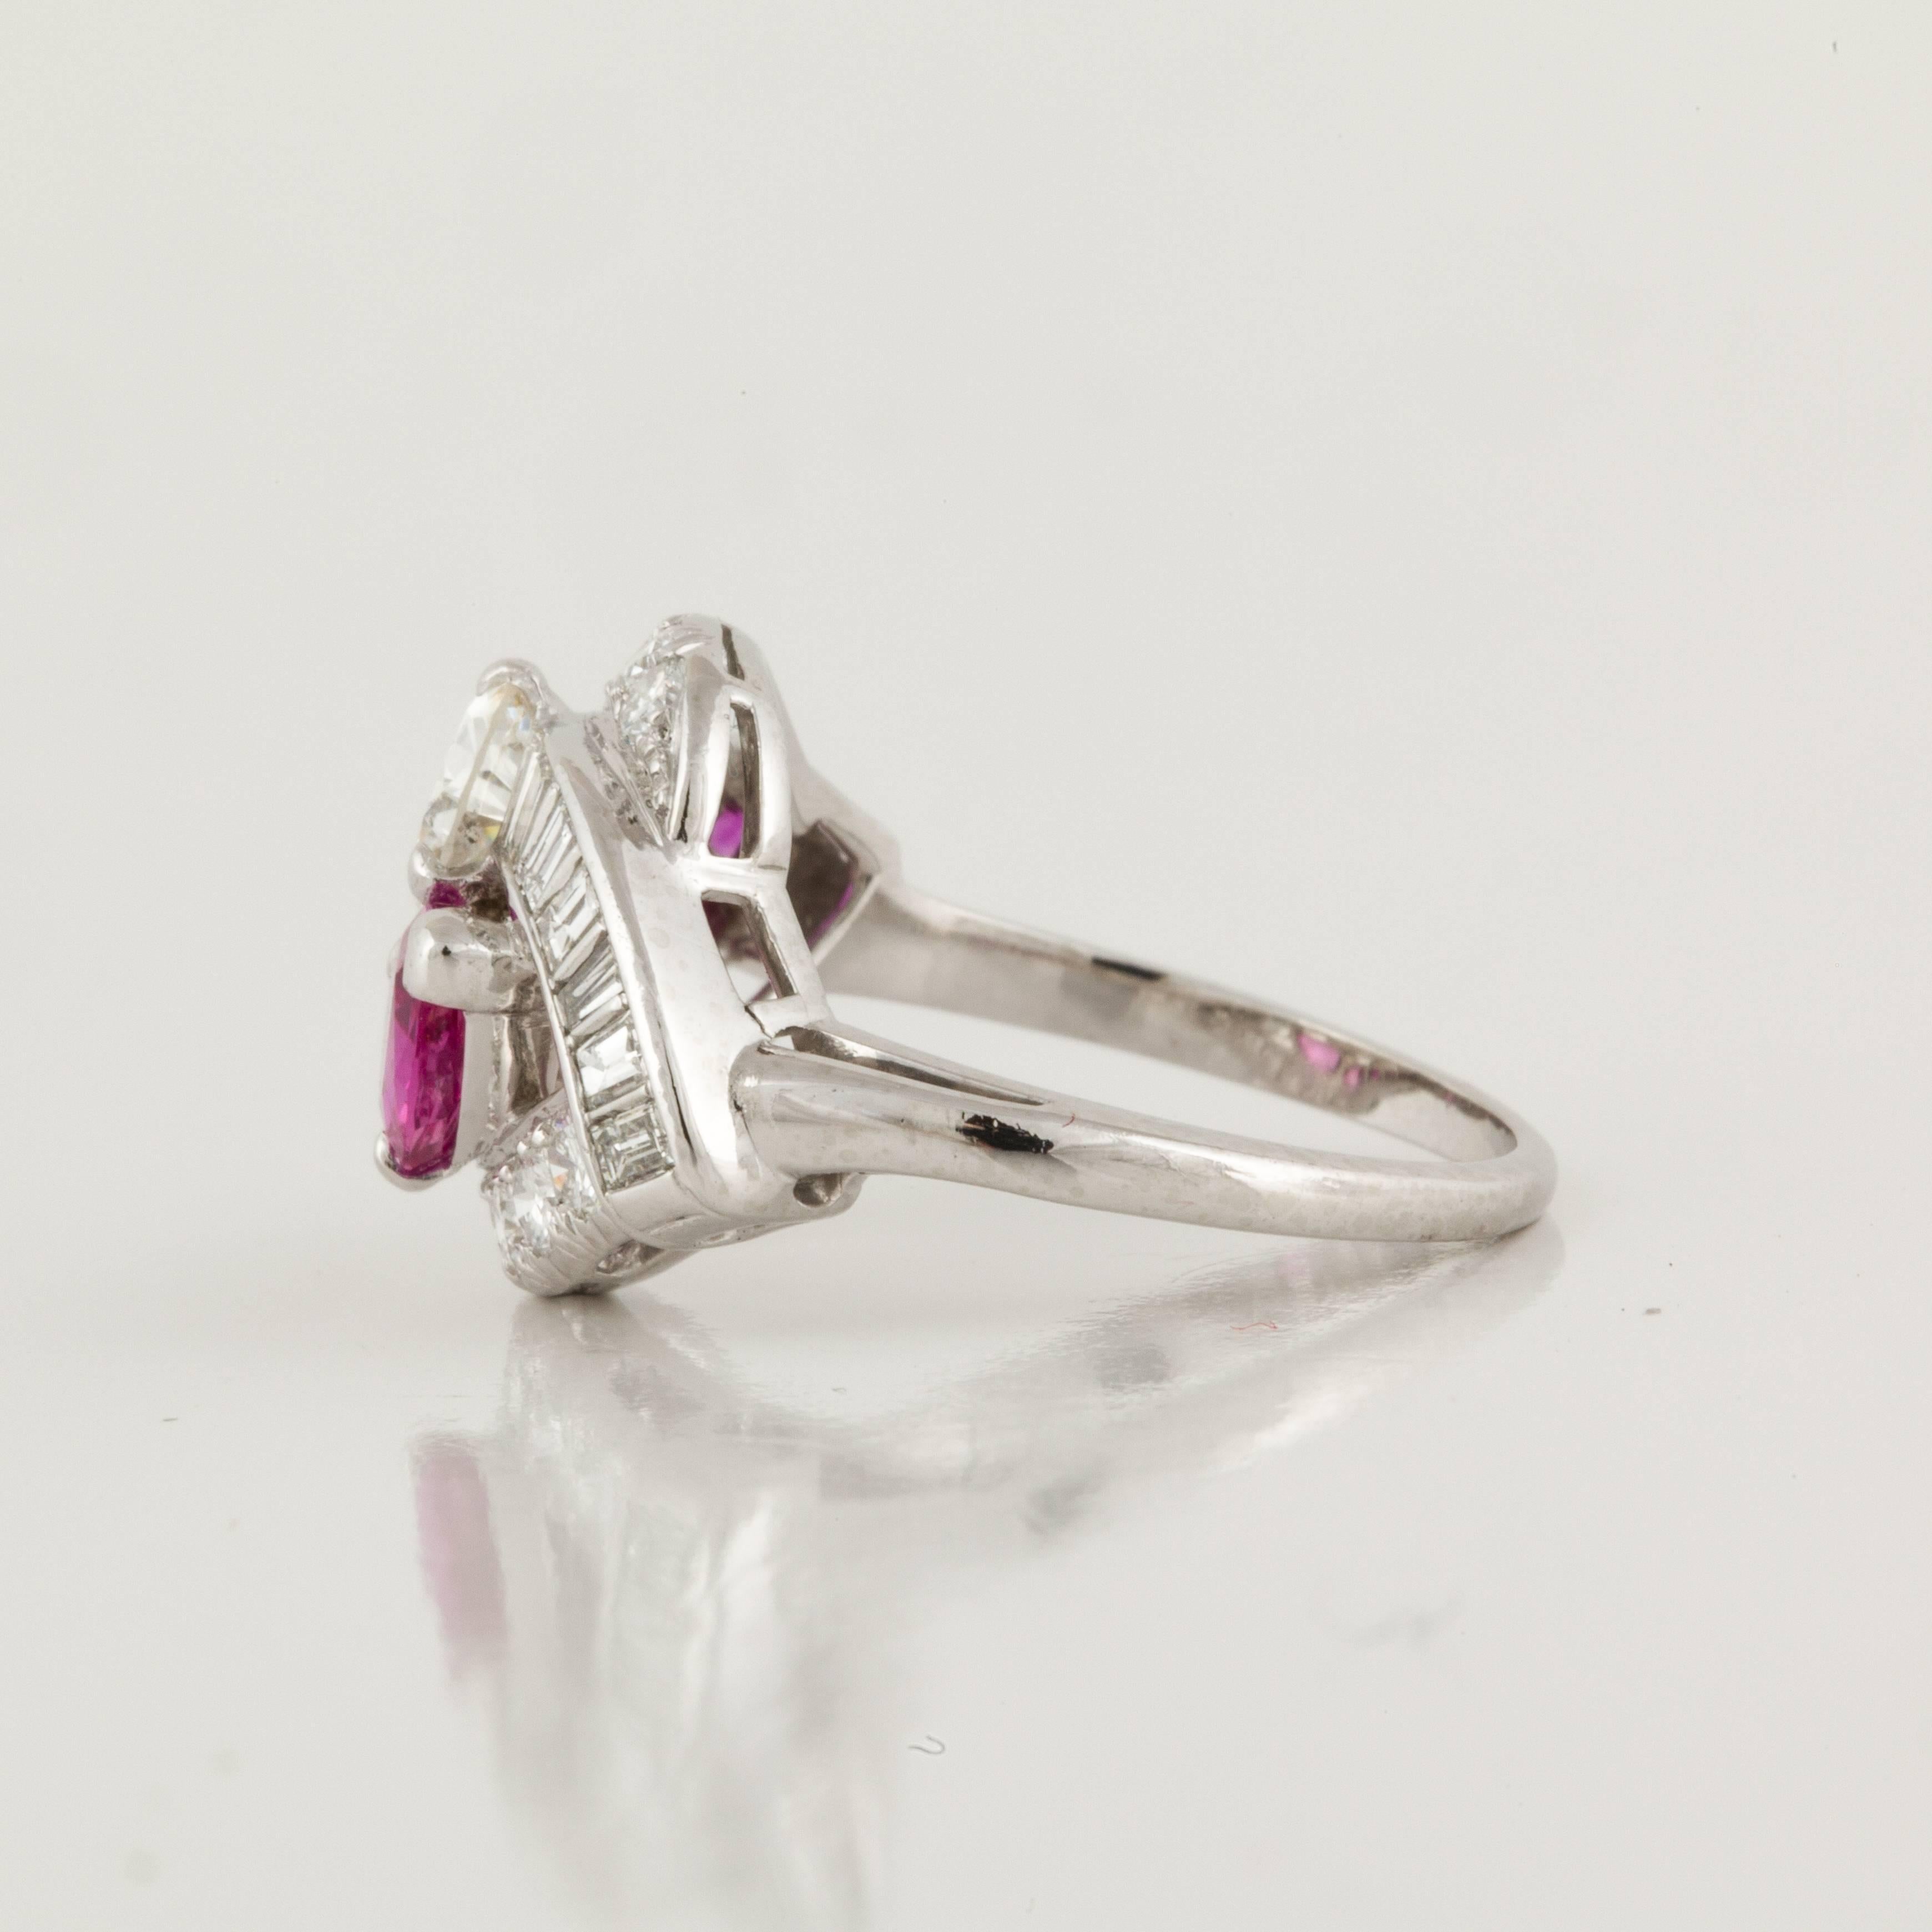 Mixed Cut Bypass Ruby and Diamond Ring in Platinum